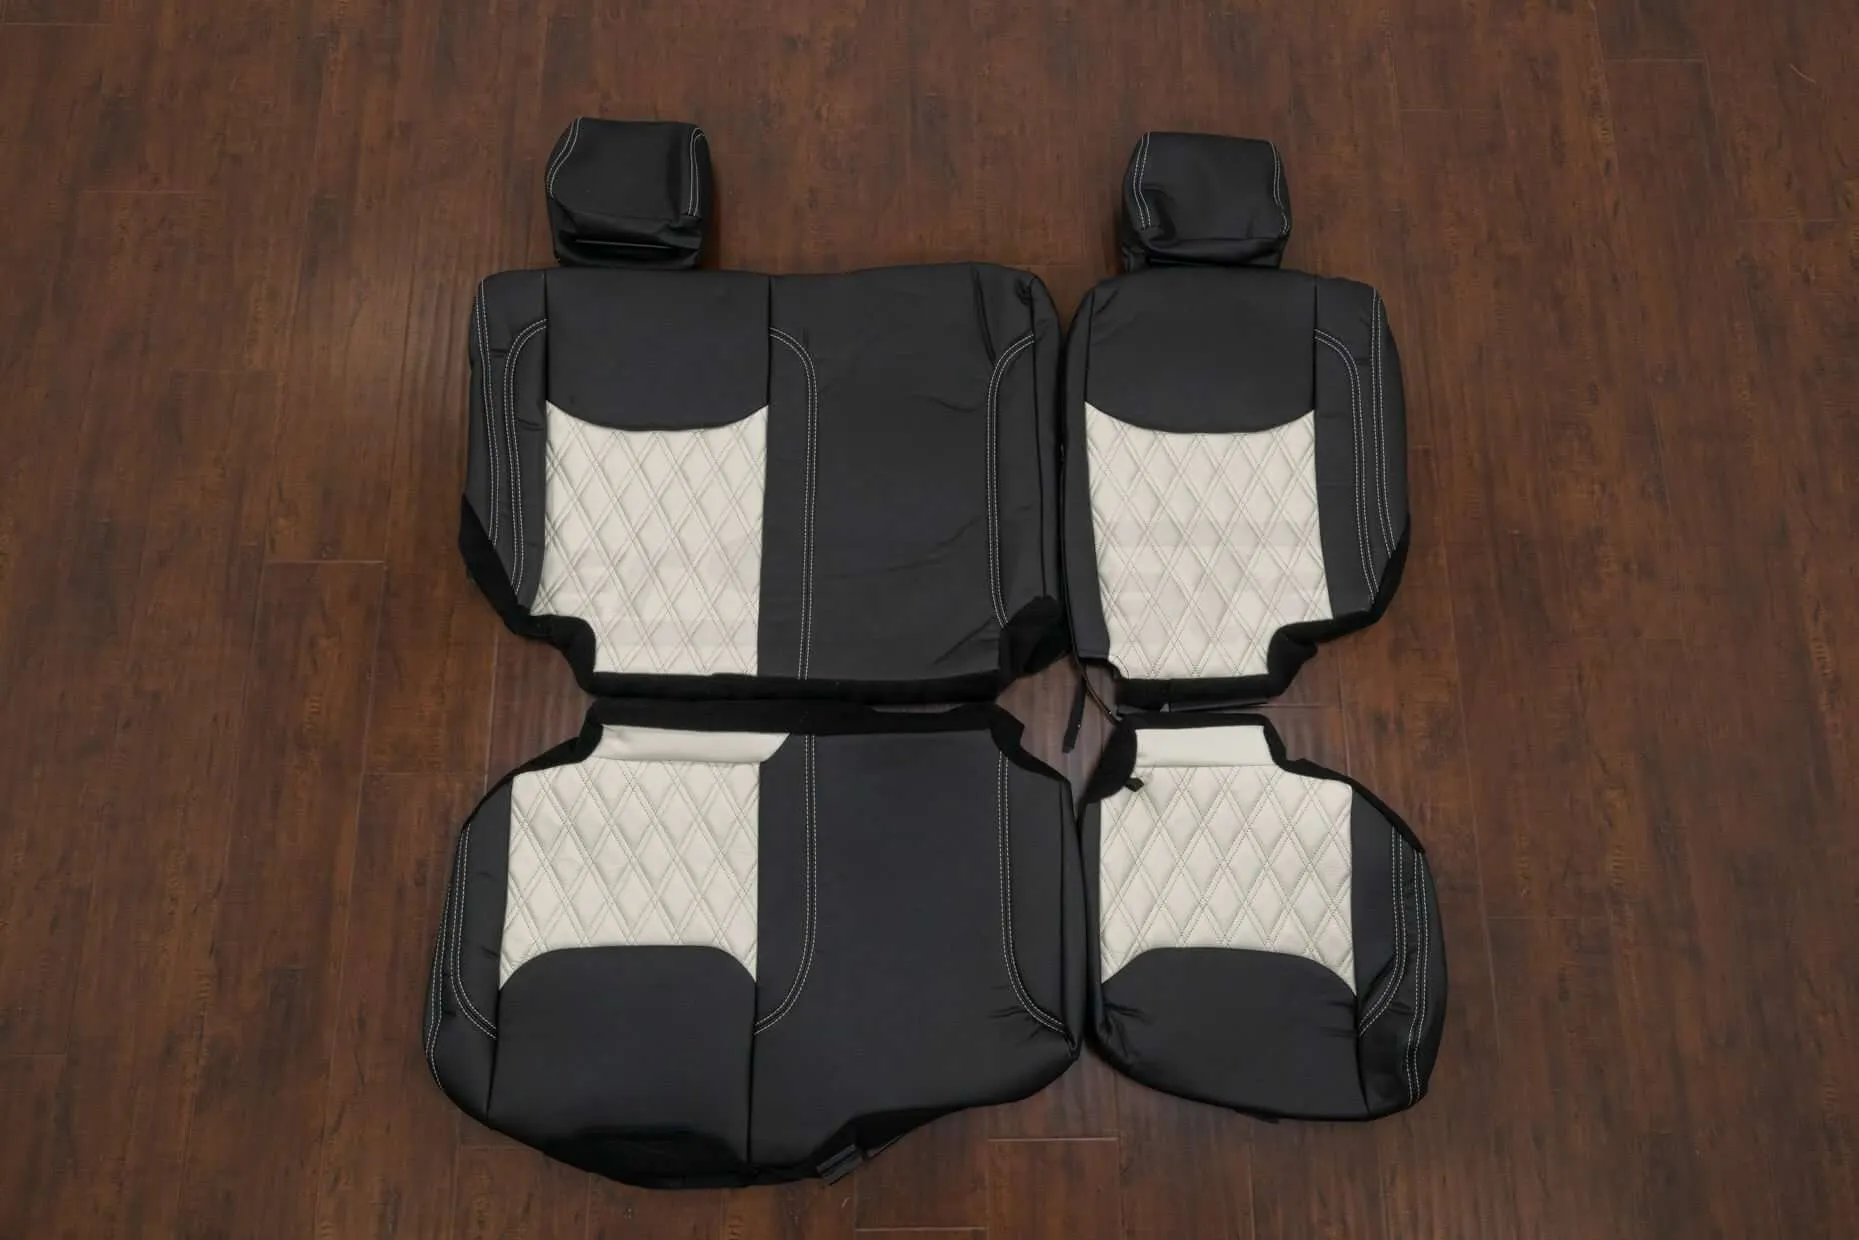 Jeep Wrangler JK Leather Seat Kit w/ Quilted Inserts - Black & White - Rear seat upholstery